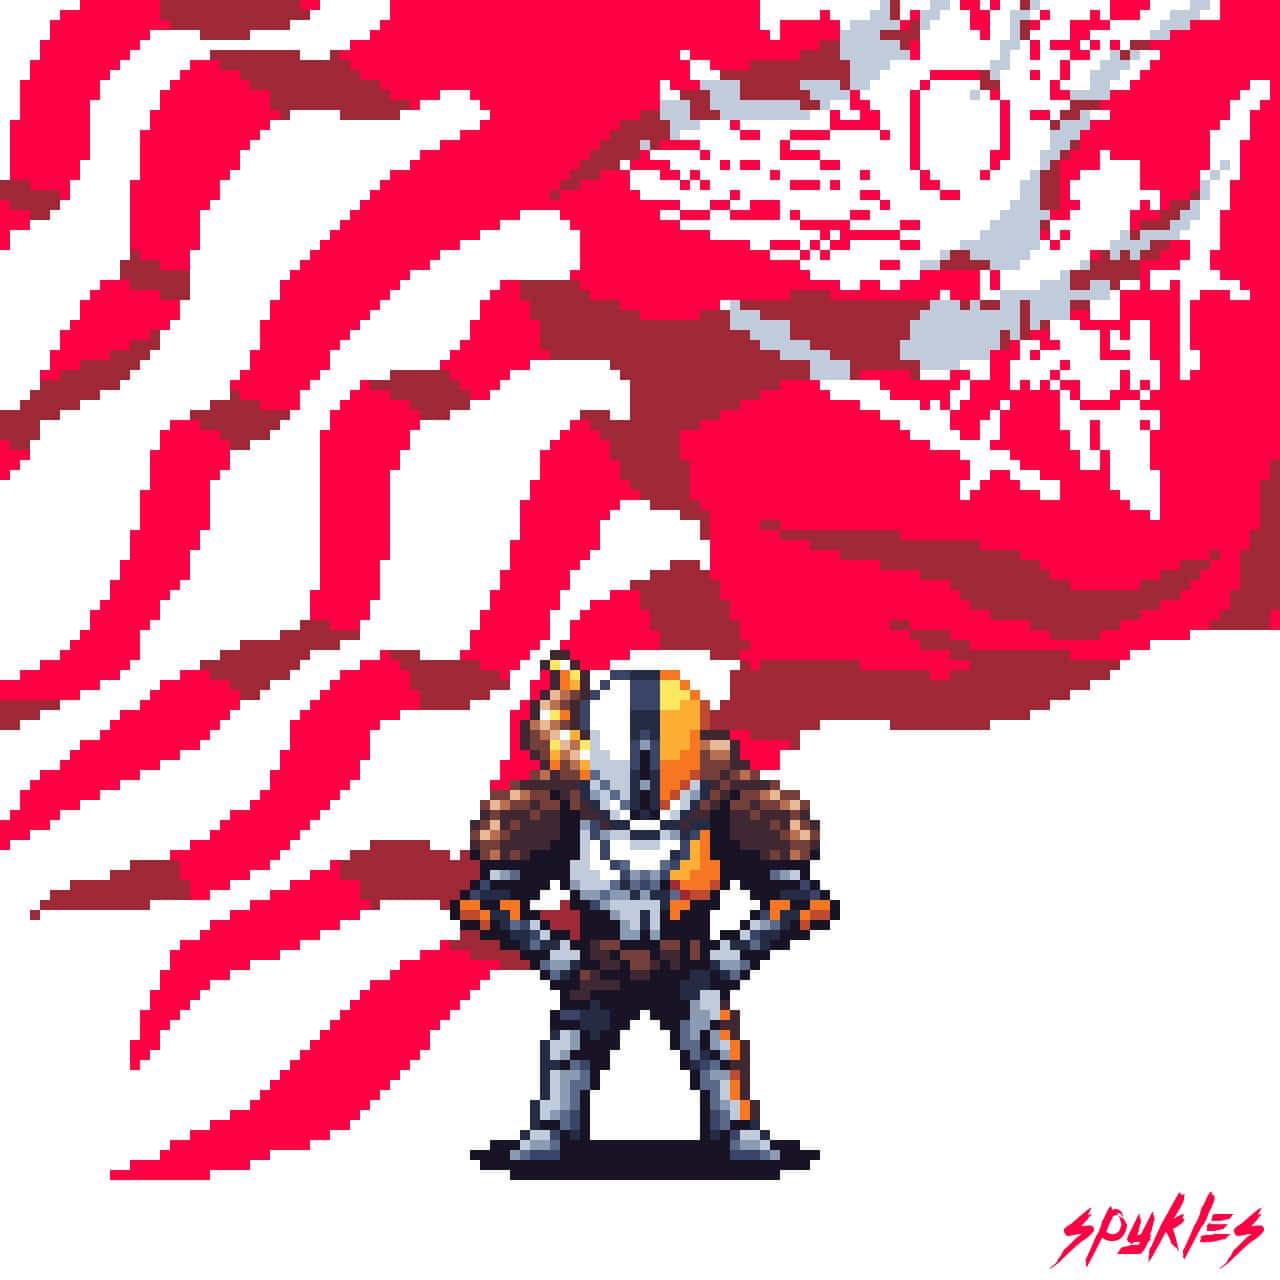 “special Pixel Art From The Popular Video Game Destiny”